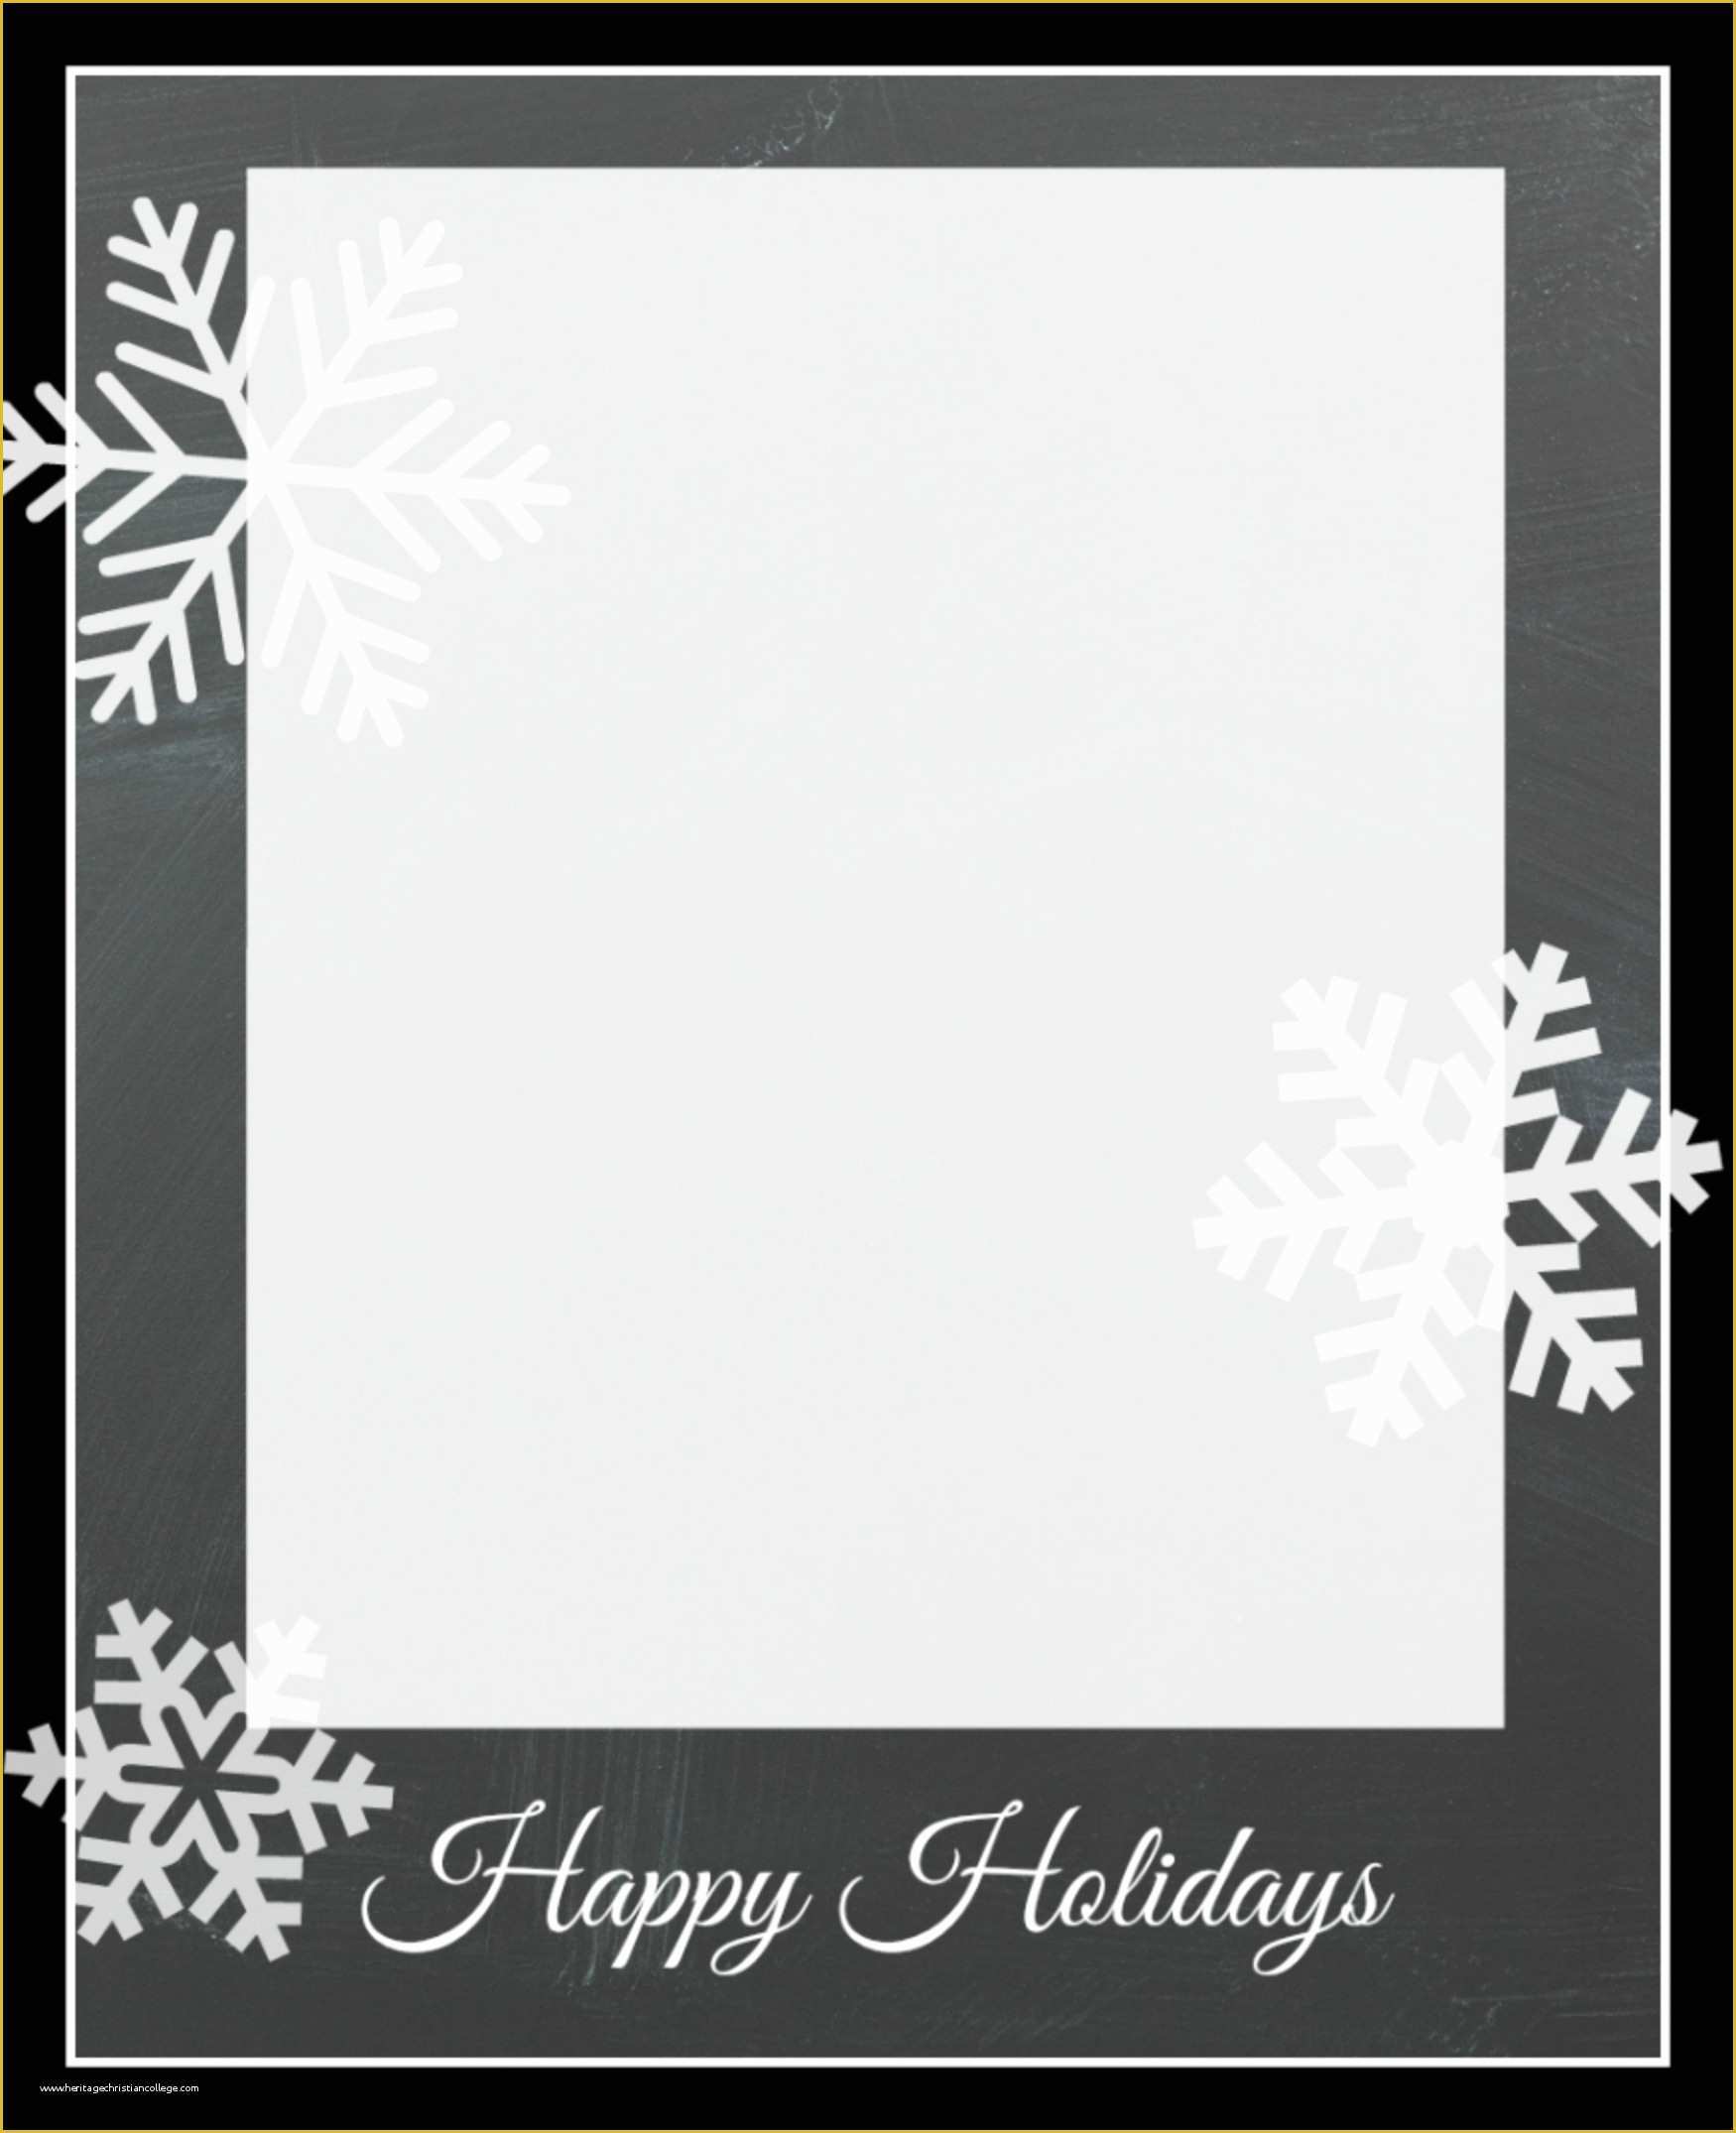 Free Holiday Card Templates Of Free Christmas Card Templates Crazy Little Projects